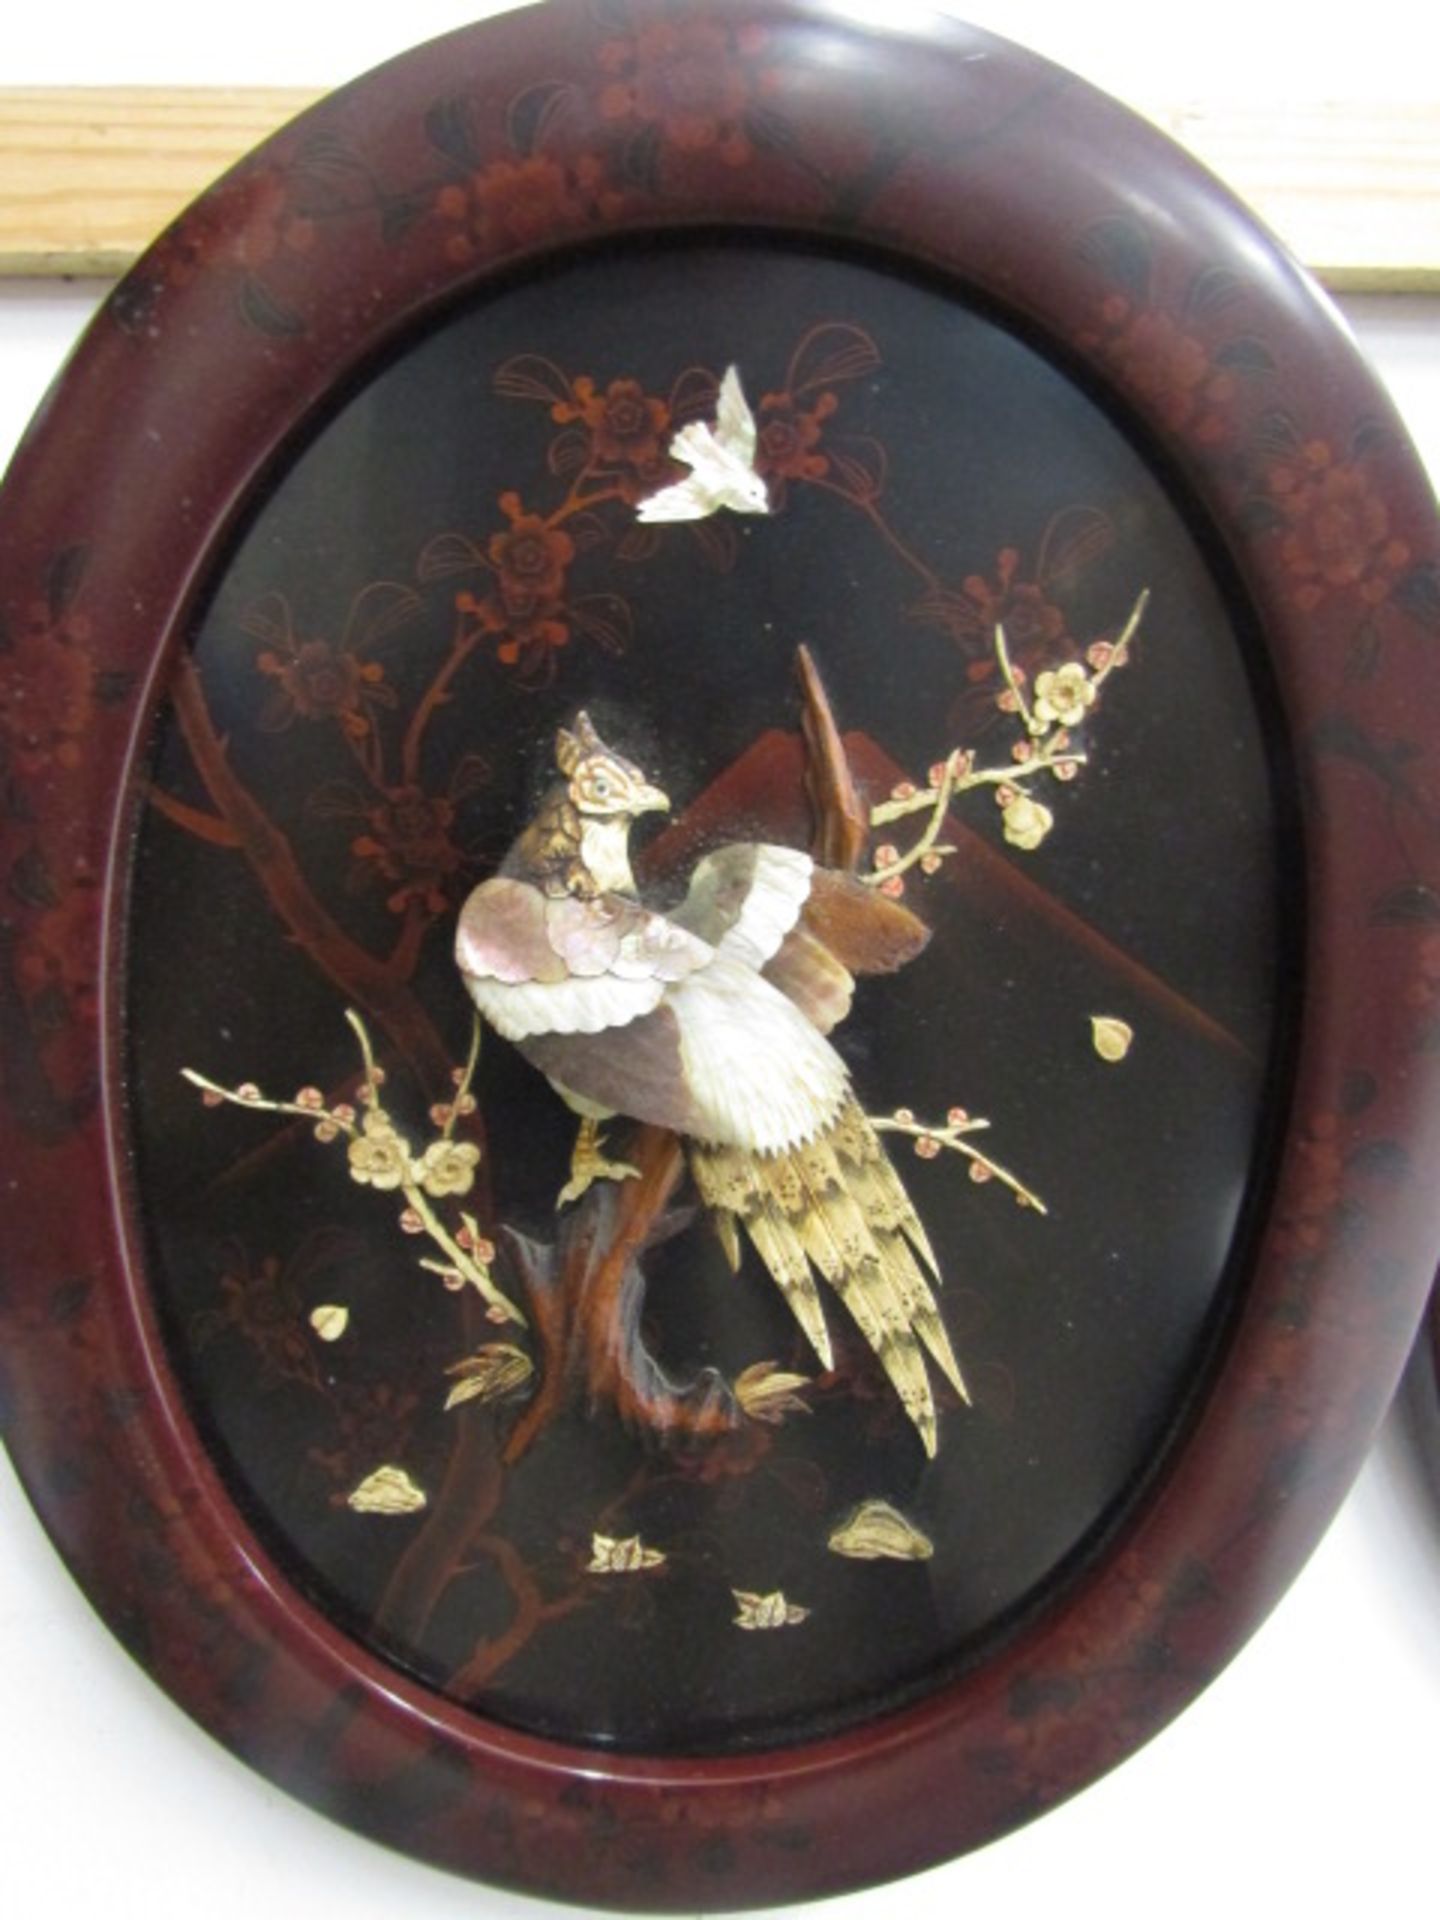 2 Shibayama plaques of birds in mother of pearl 3D design with lacquered style frames 54cmH - Image 2 of 5